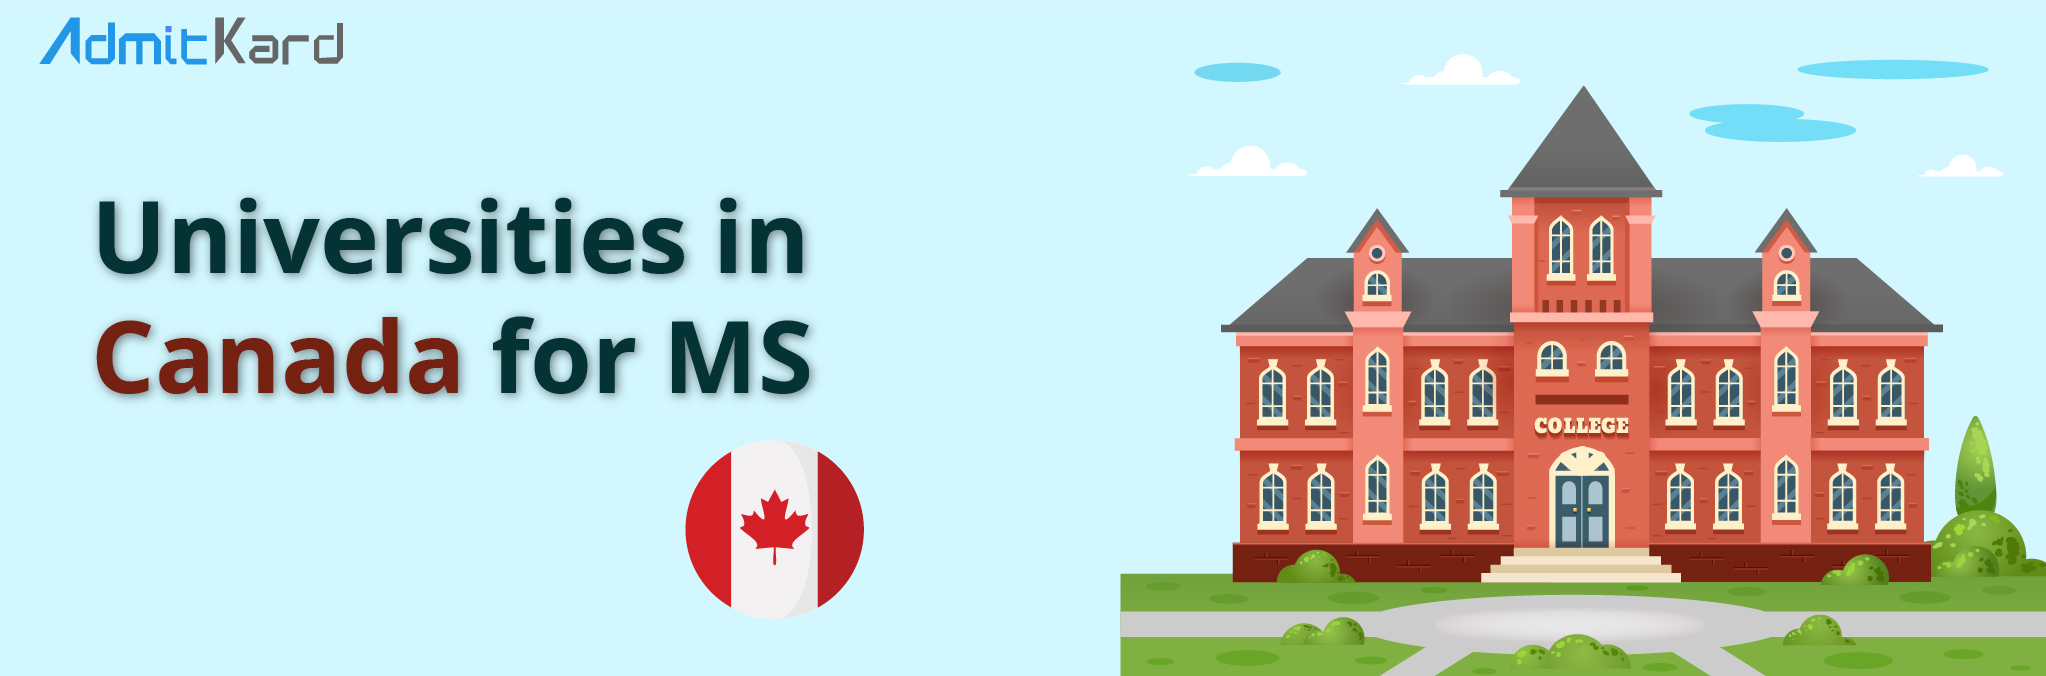 universities in canada for ms